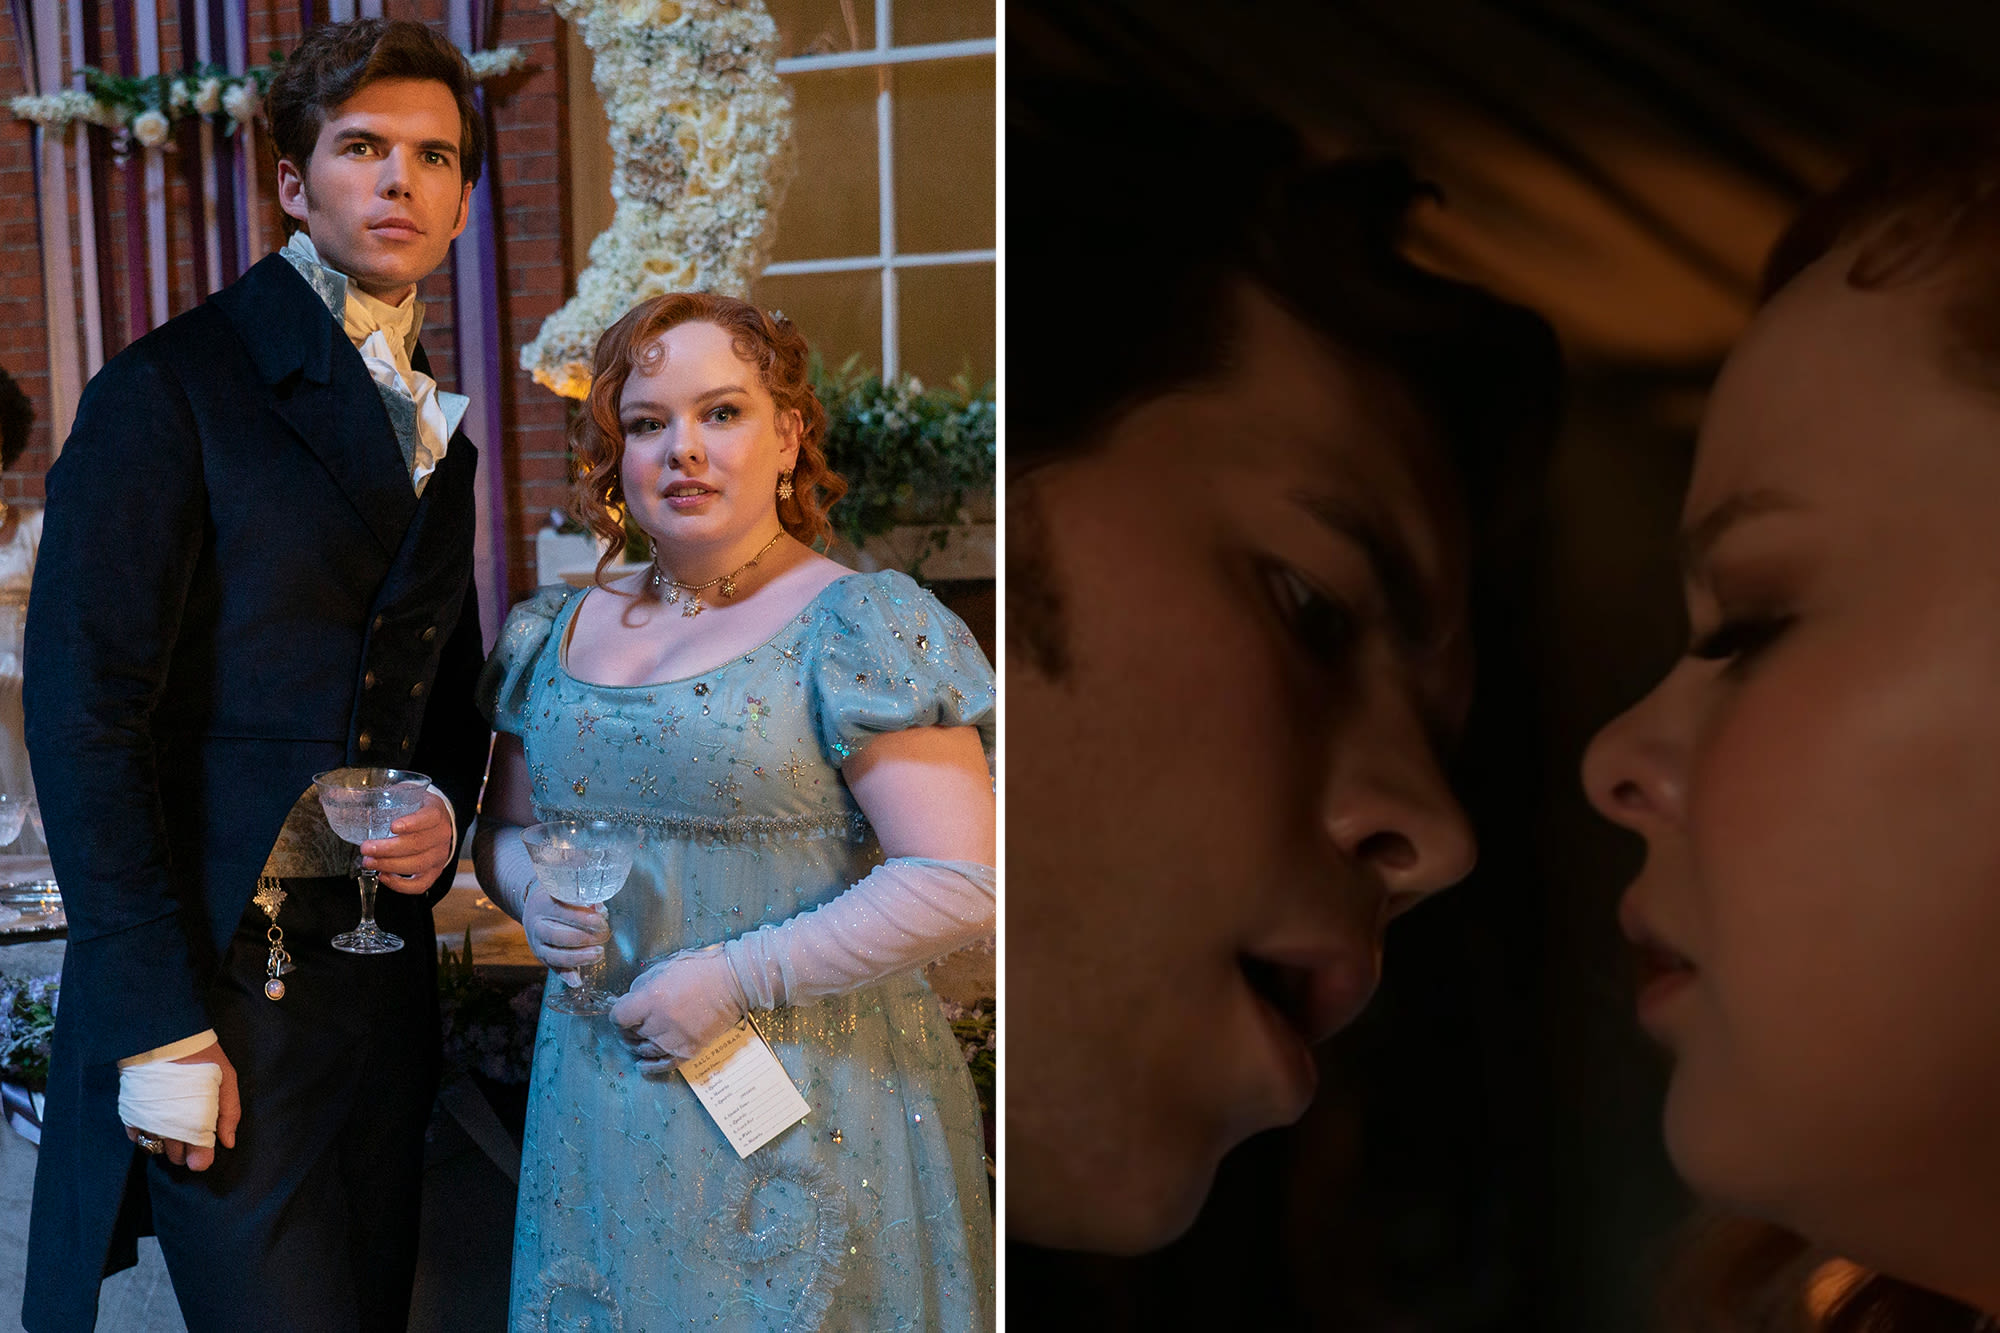 Rewind and repeat: Here’s all the tea on that steamy ‘Bridgerton’ carriage scene